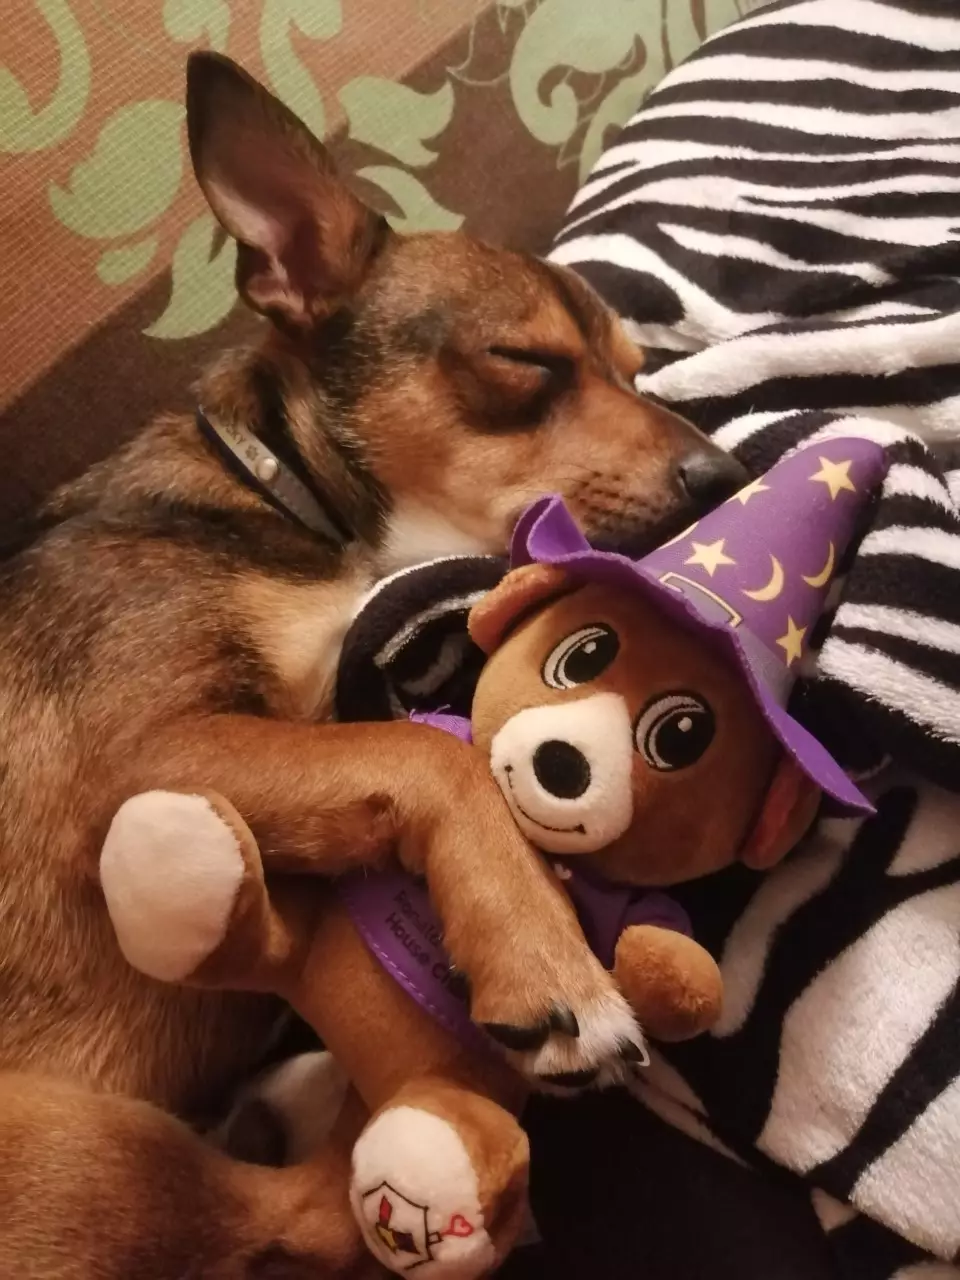 Rocky is now recovering with his cuddly toy (